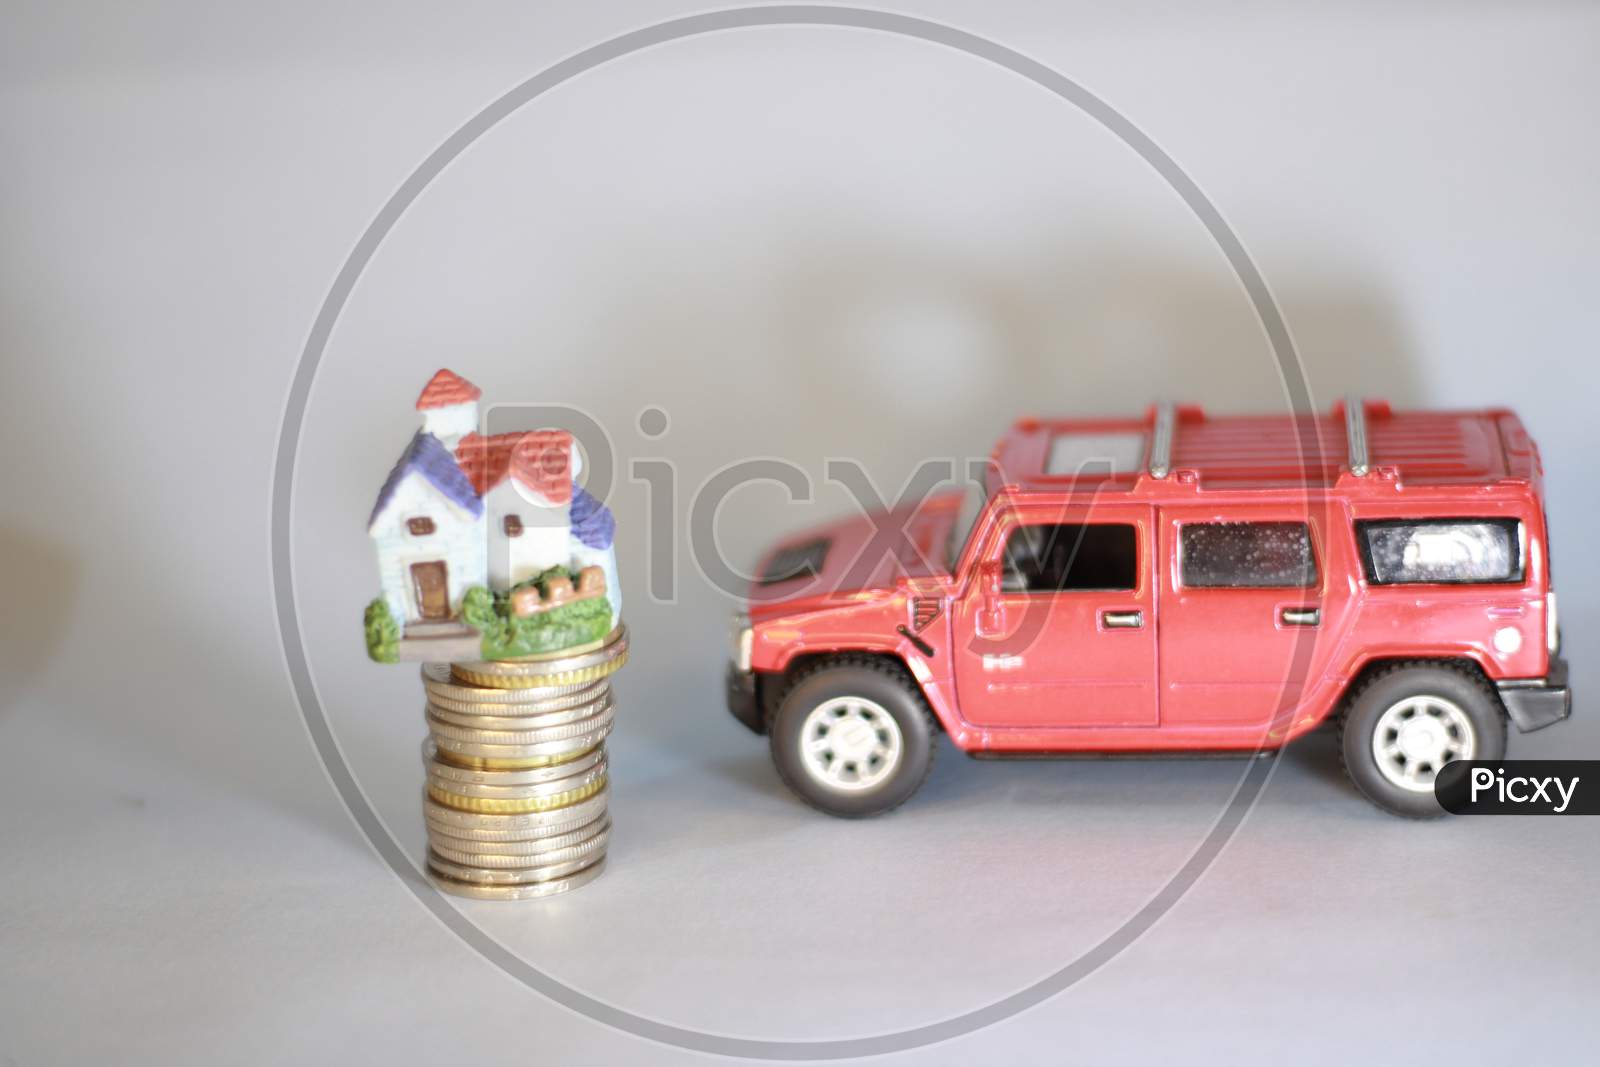 house model on money coins concept for savings, investment,  mortgage fund finance and home loan refinance. Real estate or property development. Bank loan or finance for home, Car loan financing.